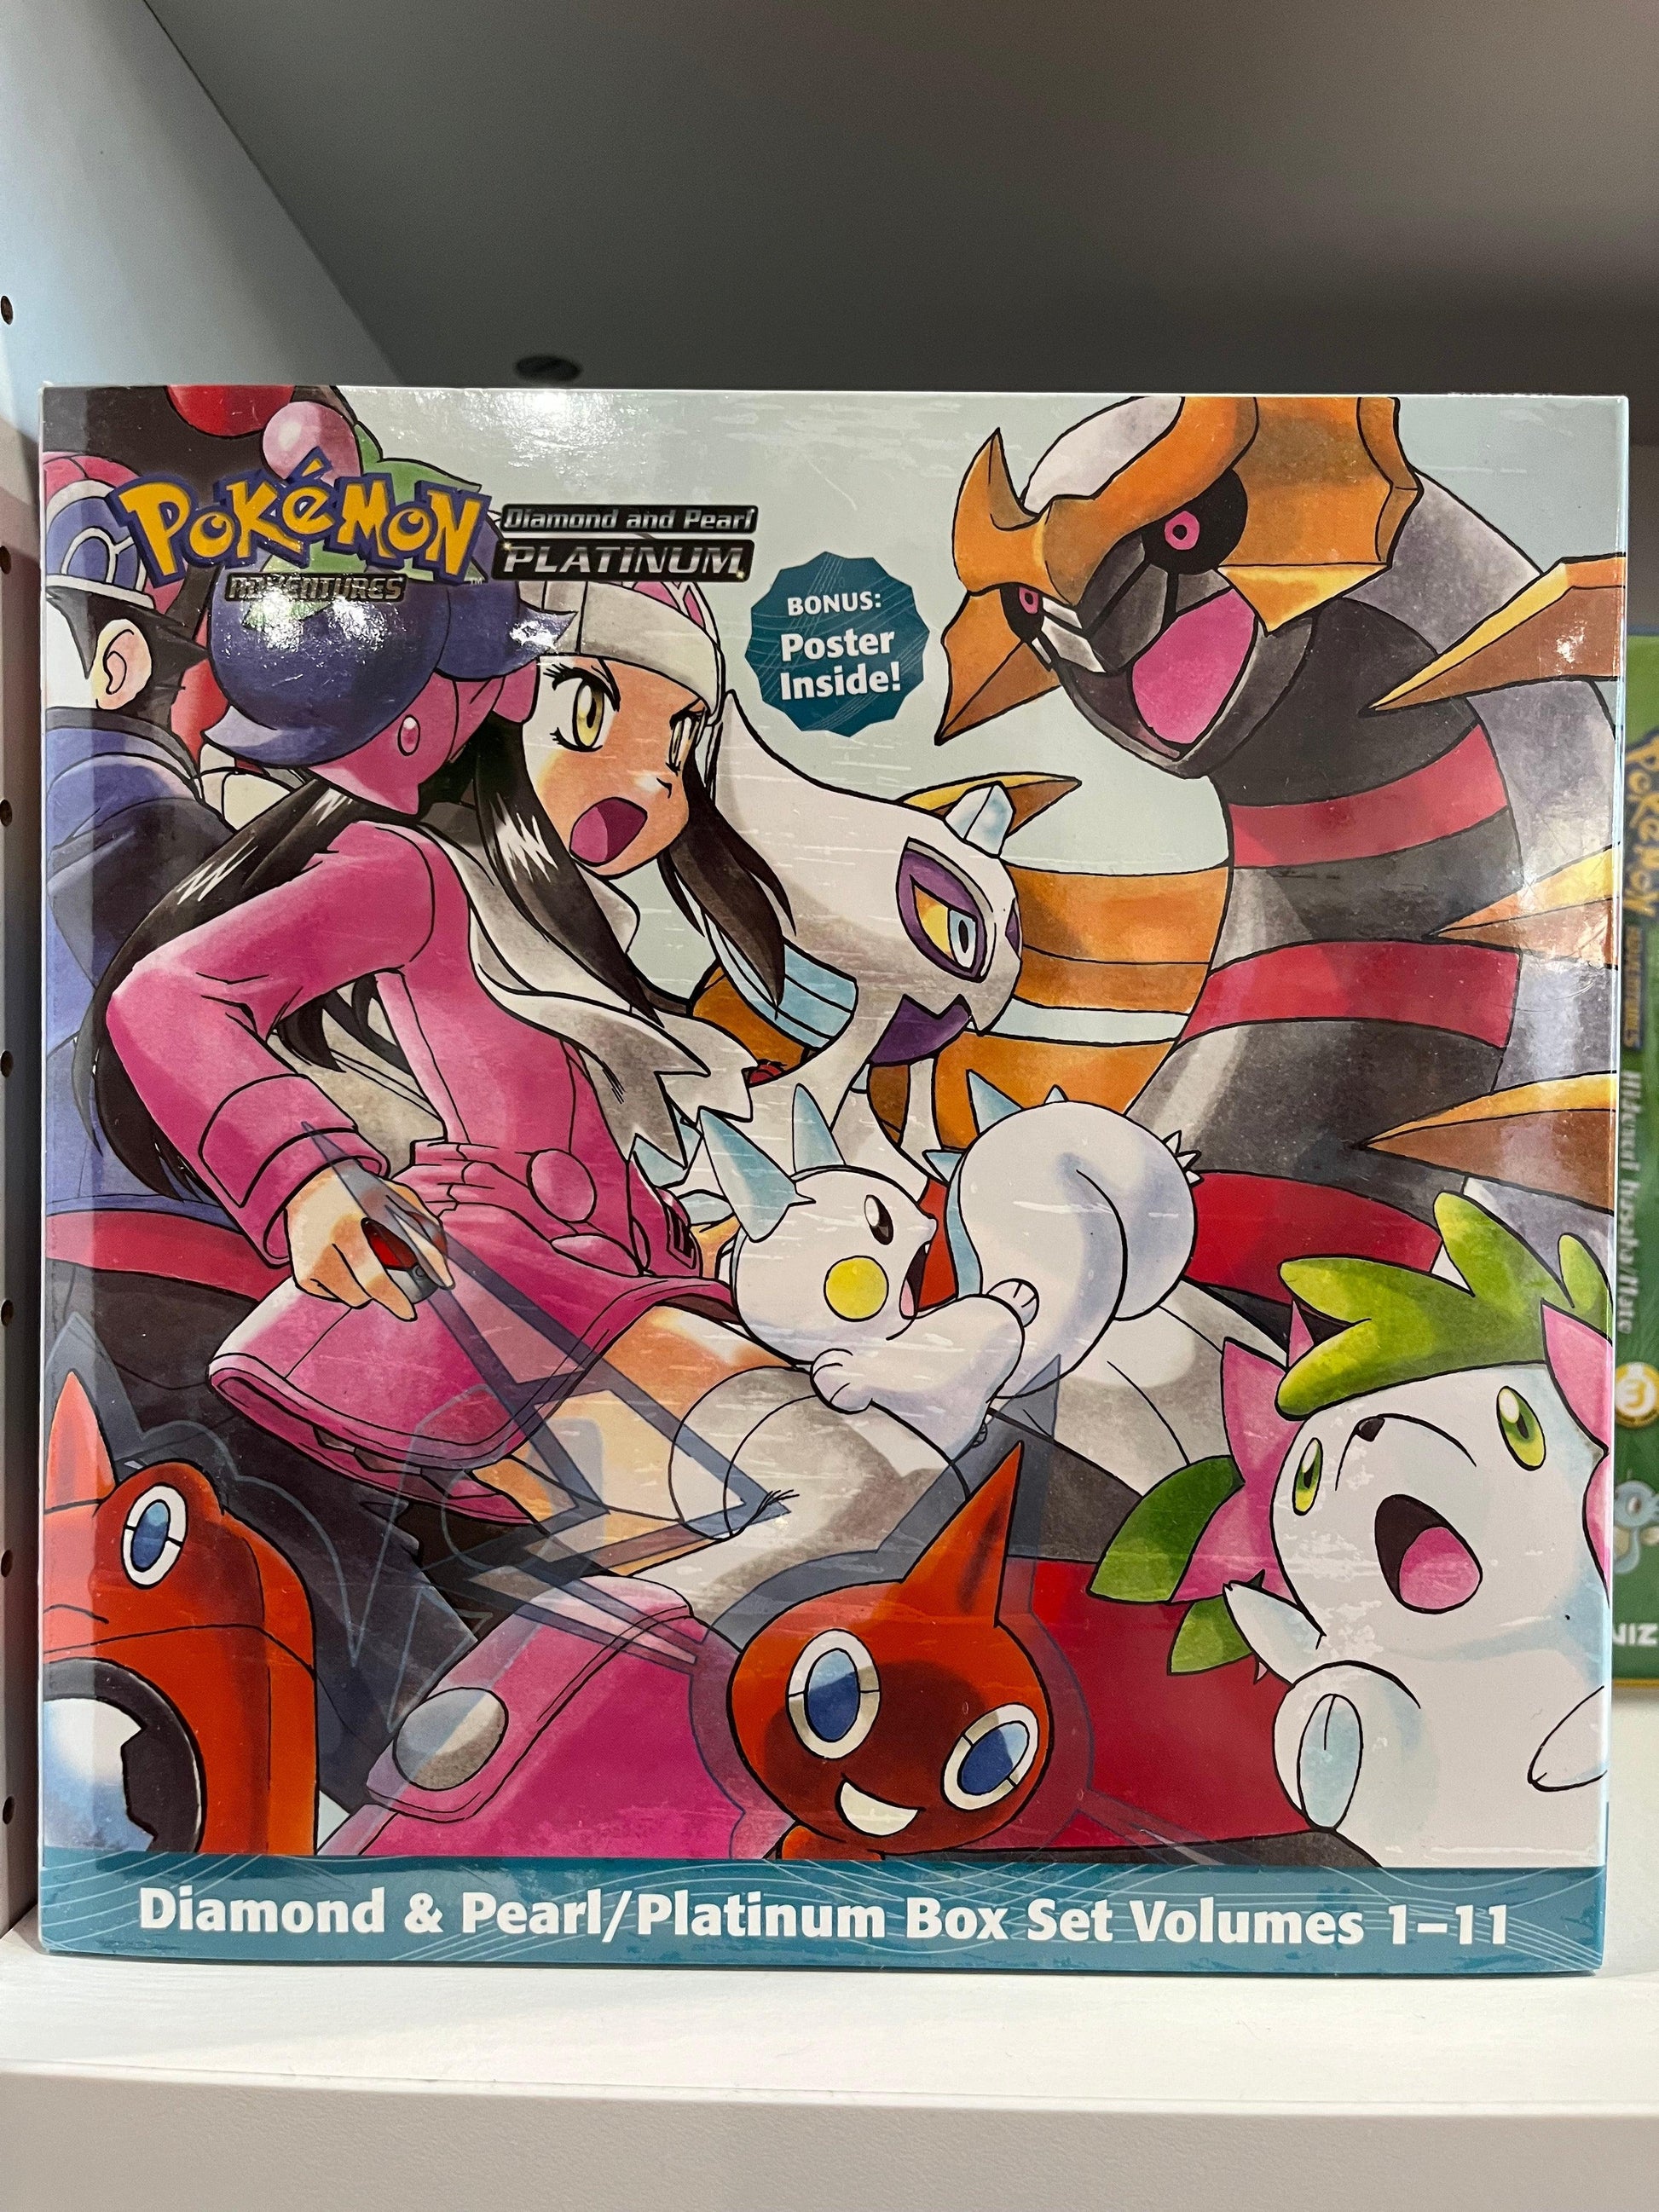 Pokémon Adventures: Diamond and Pearl/Platinum, Vol. 10 - Givens Books and  Little Dickens